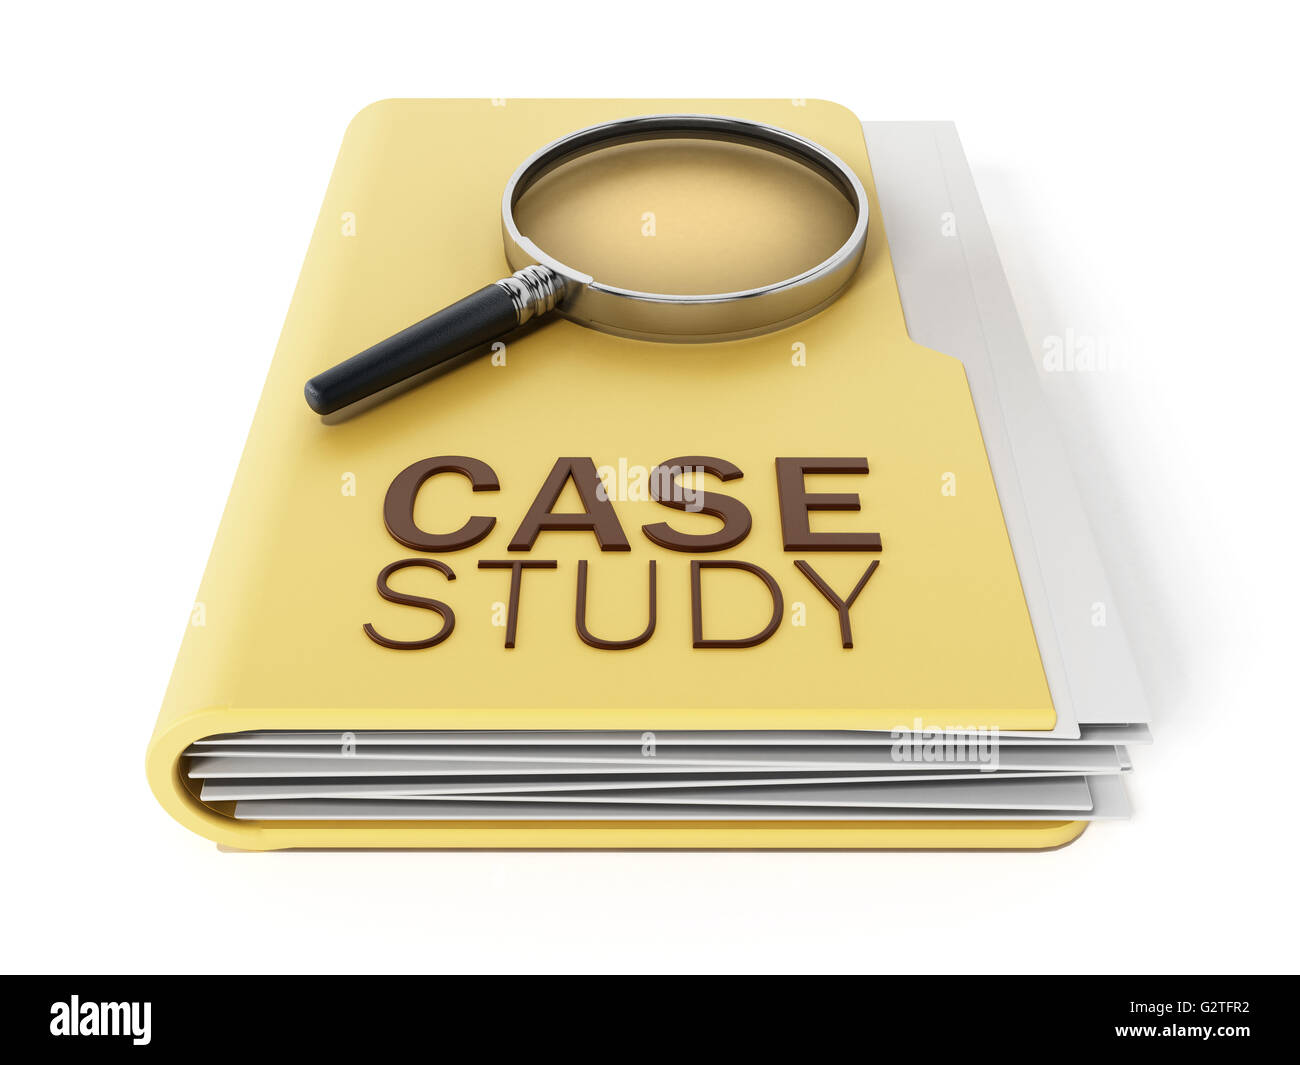 Case study text under magnifying glass standing on yellow folder. 3D illustration. Stock Photo